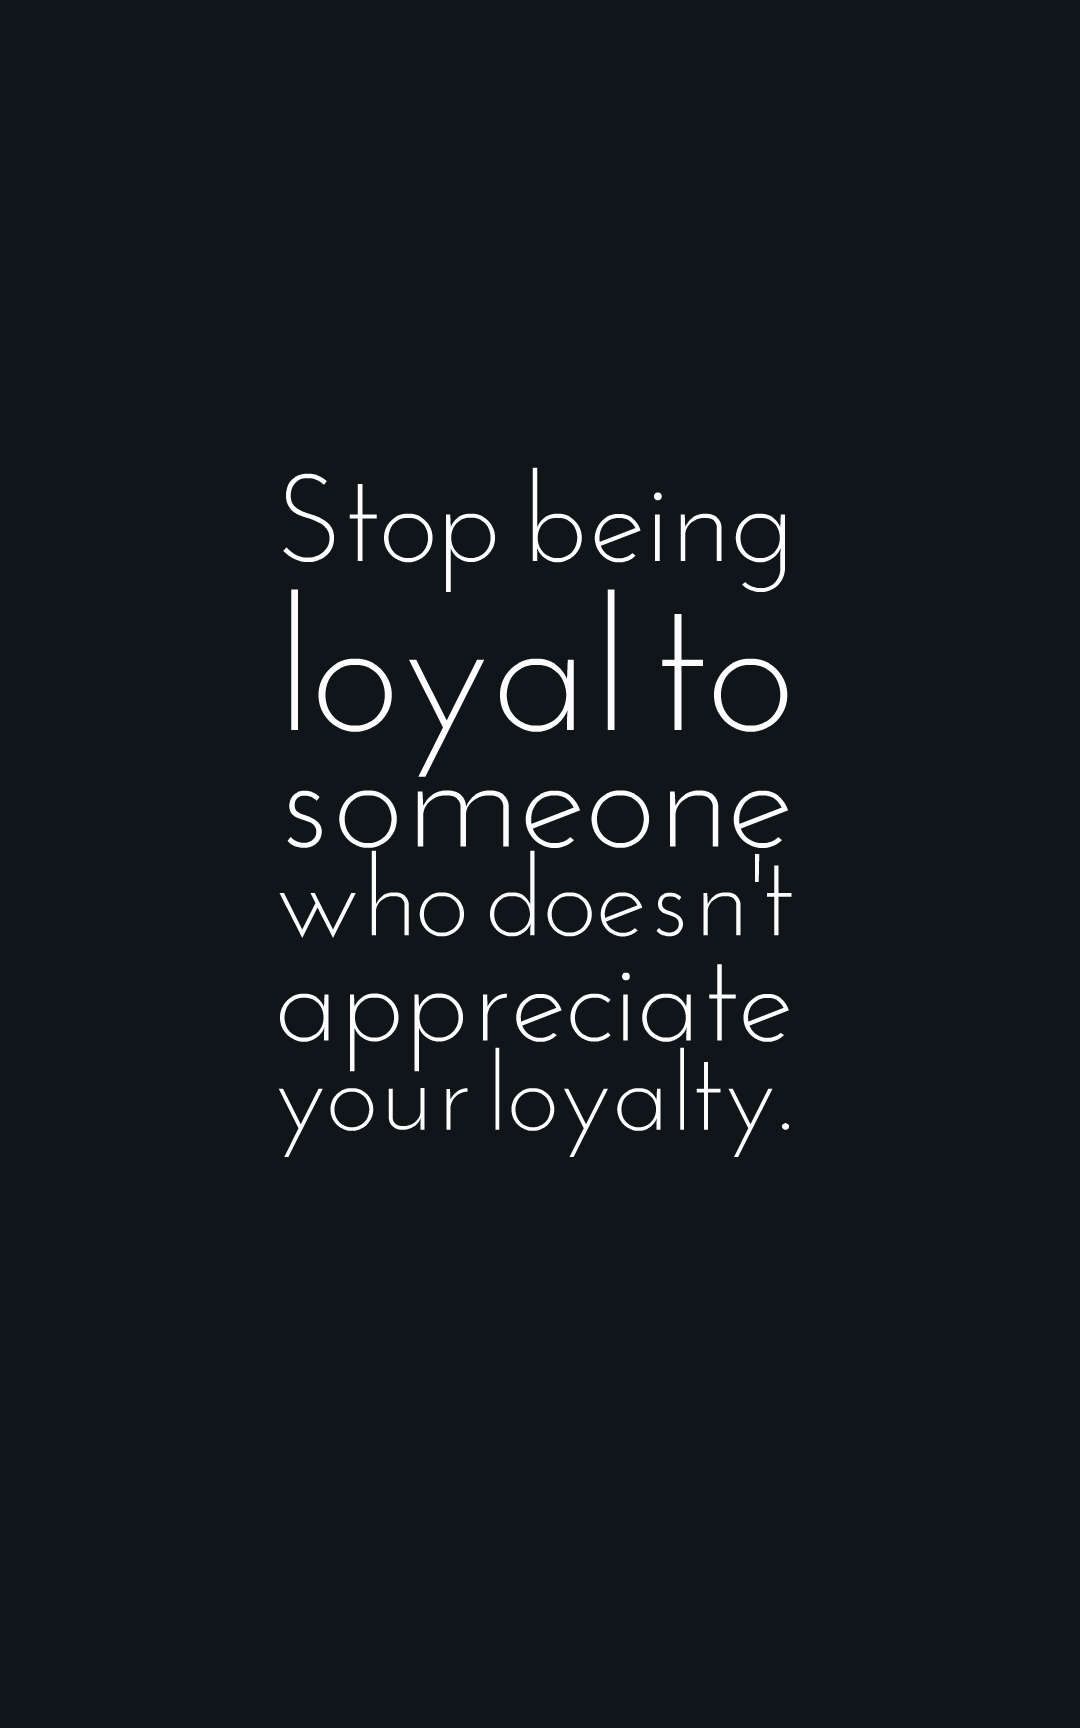 Stop being loyal to someone who doesn't appreciate your loyalty.